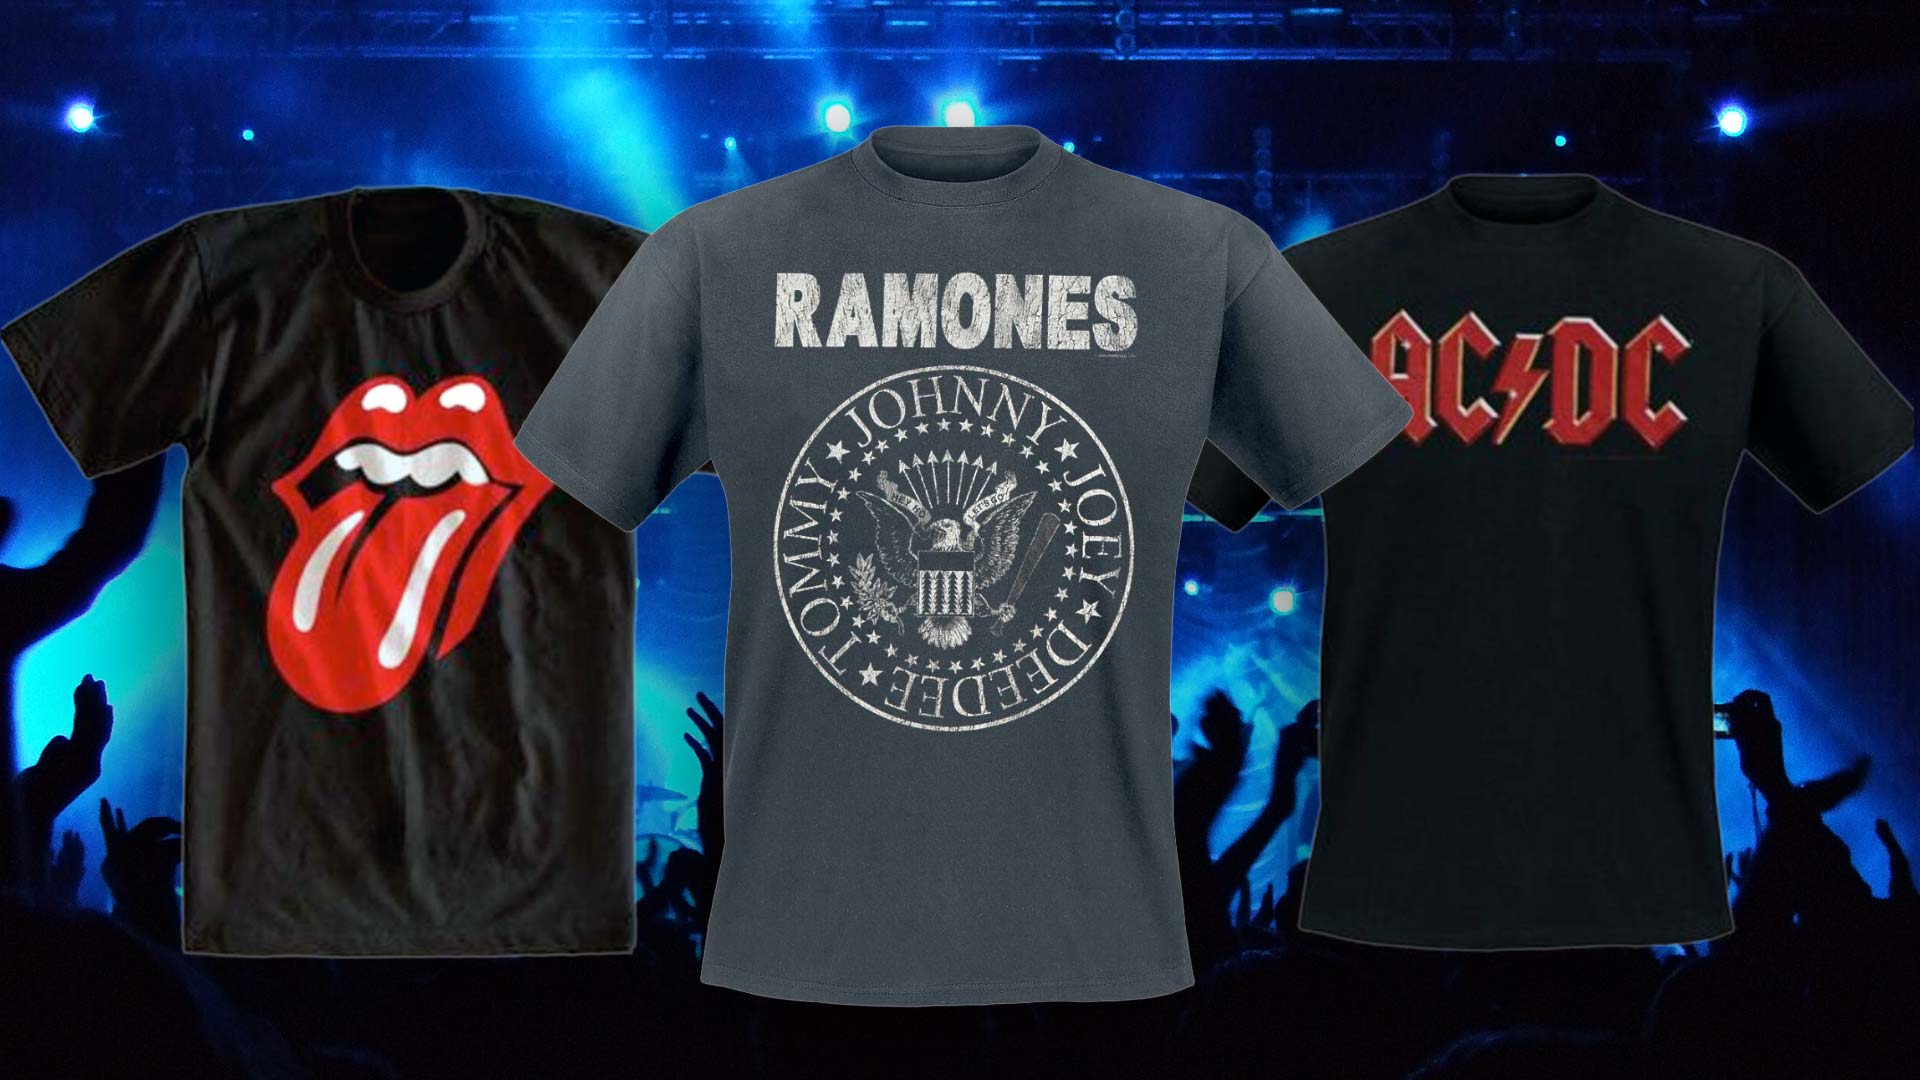 Rock Your Soul with timeless Music from the greatest Bands V-Neck T-Shirt